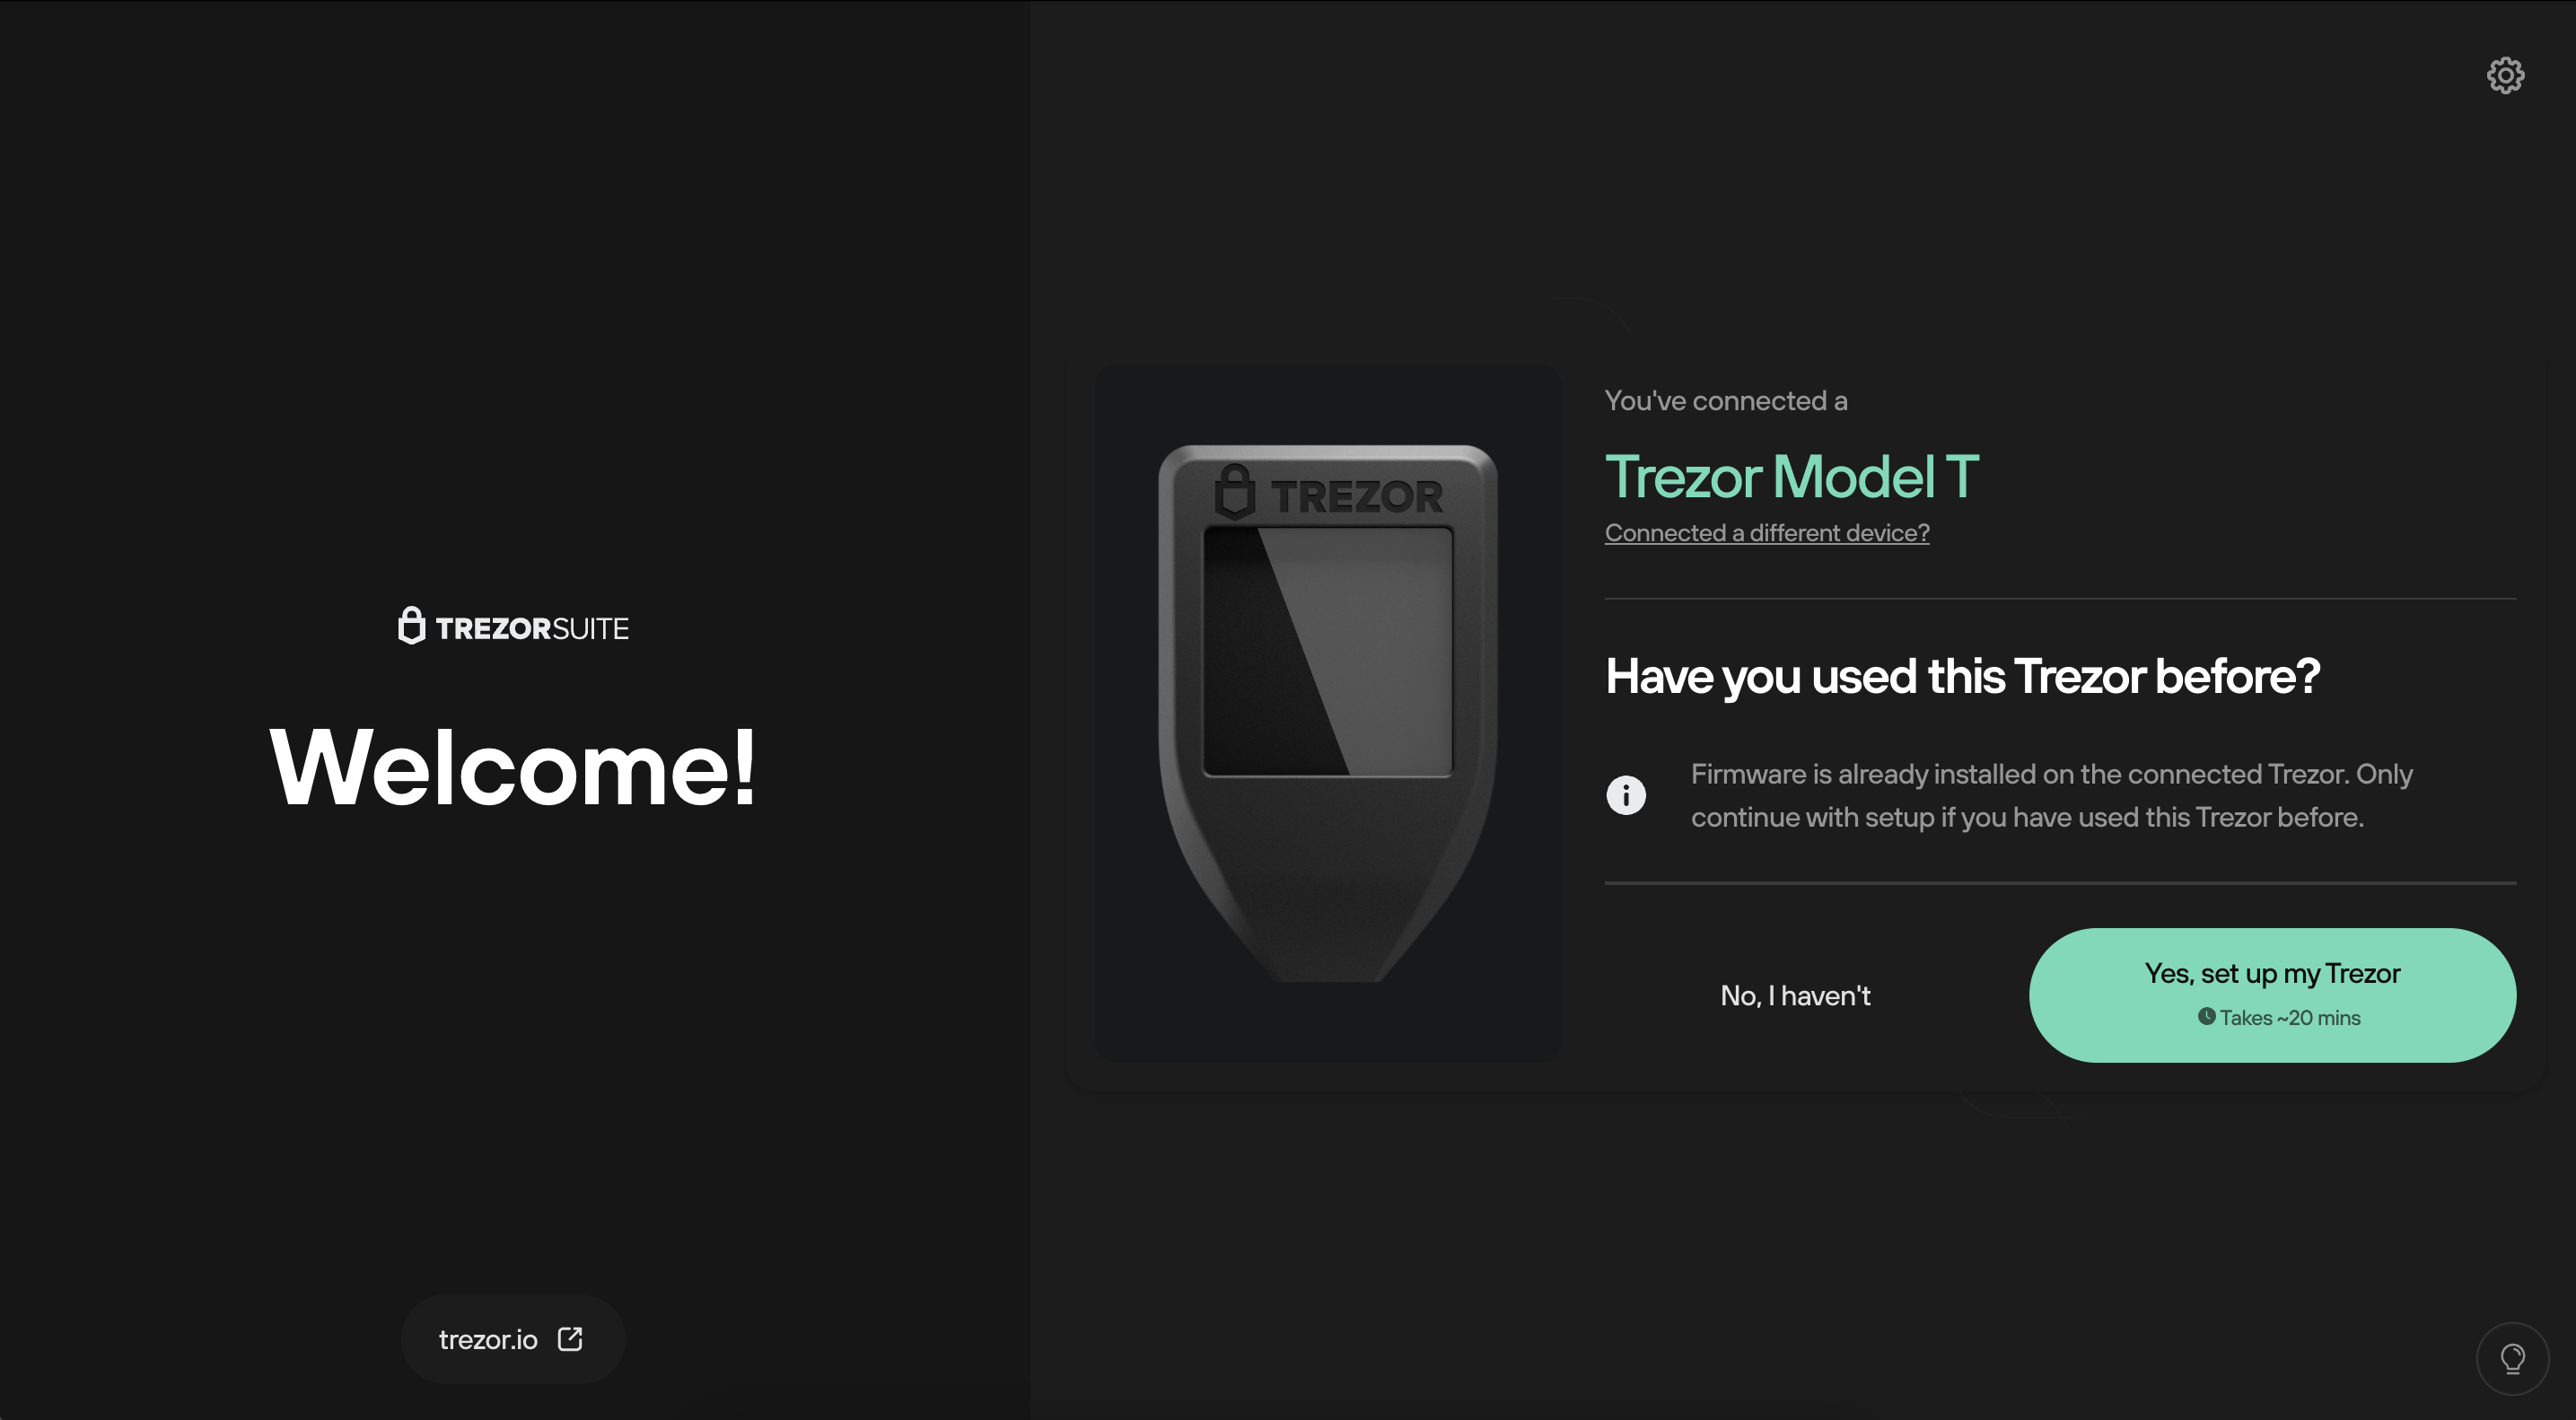 Lost Trezor Recovery Seed? - How to Recover Trezor Wallet